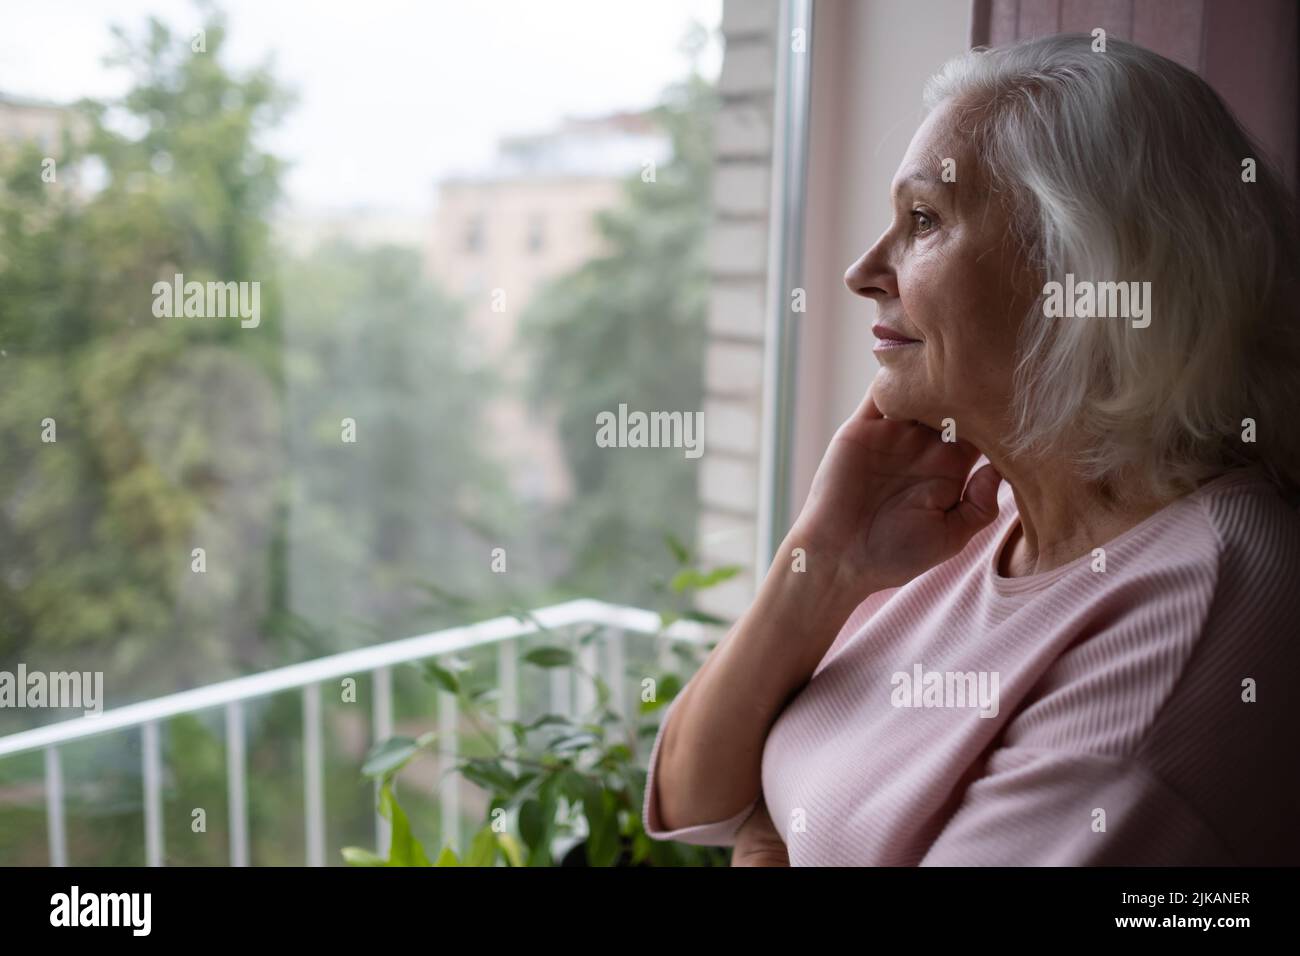 An elderly woman looks sadly out the window. Stock Photo